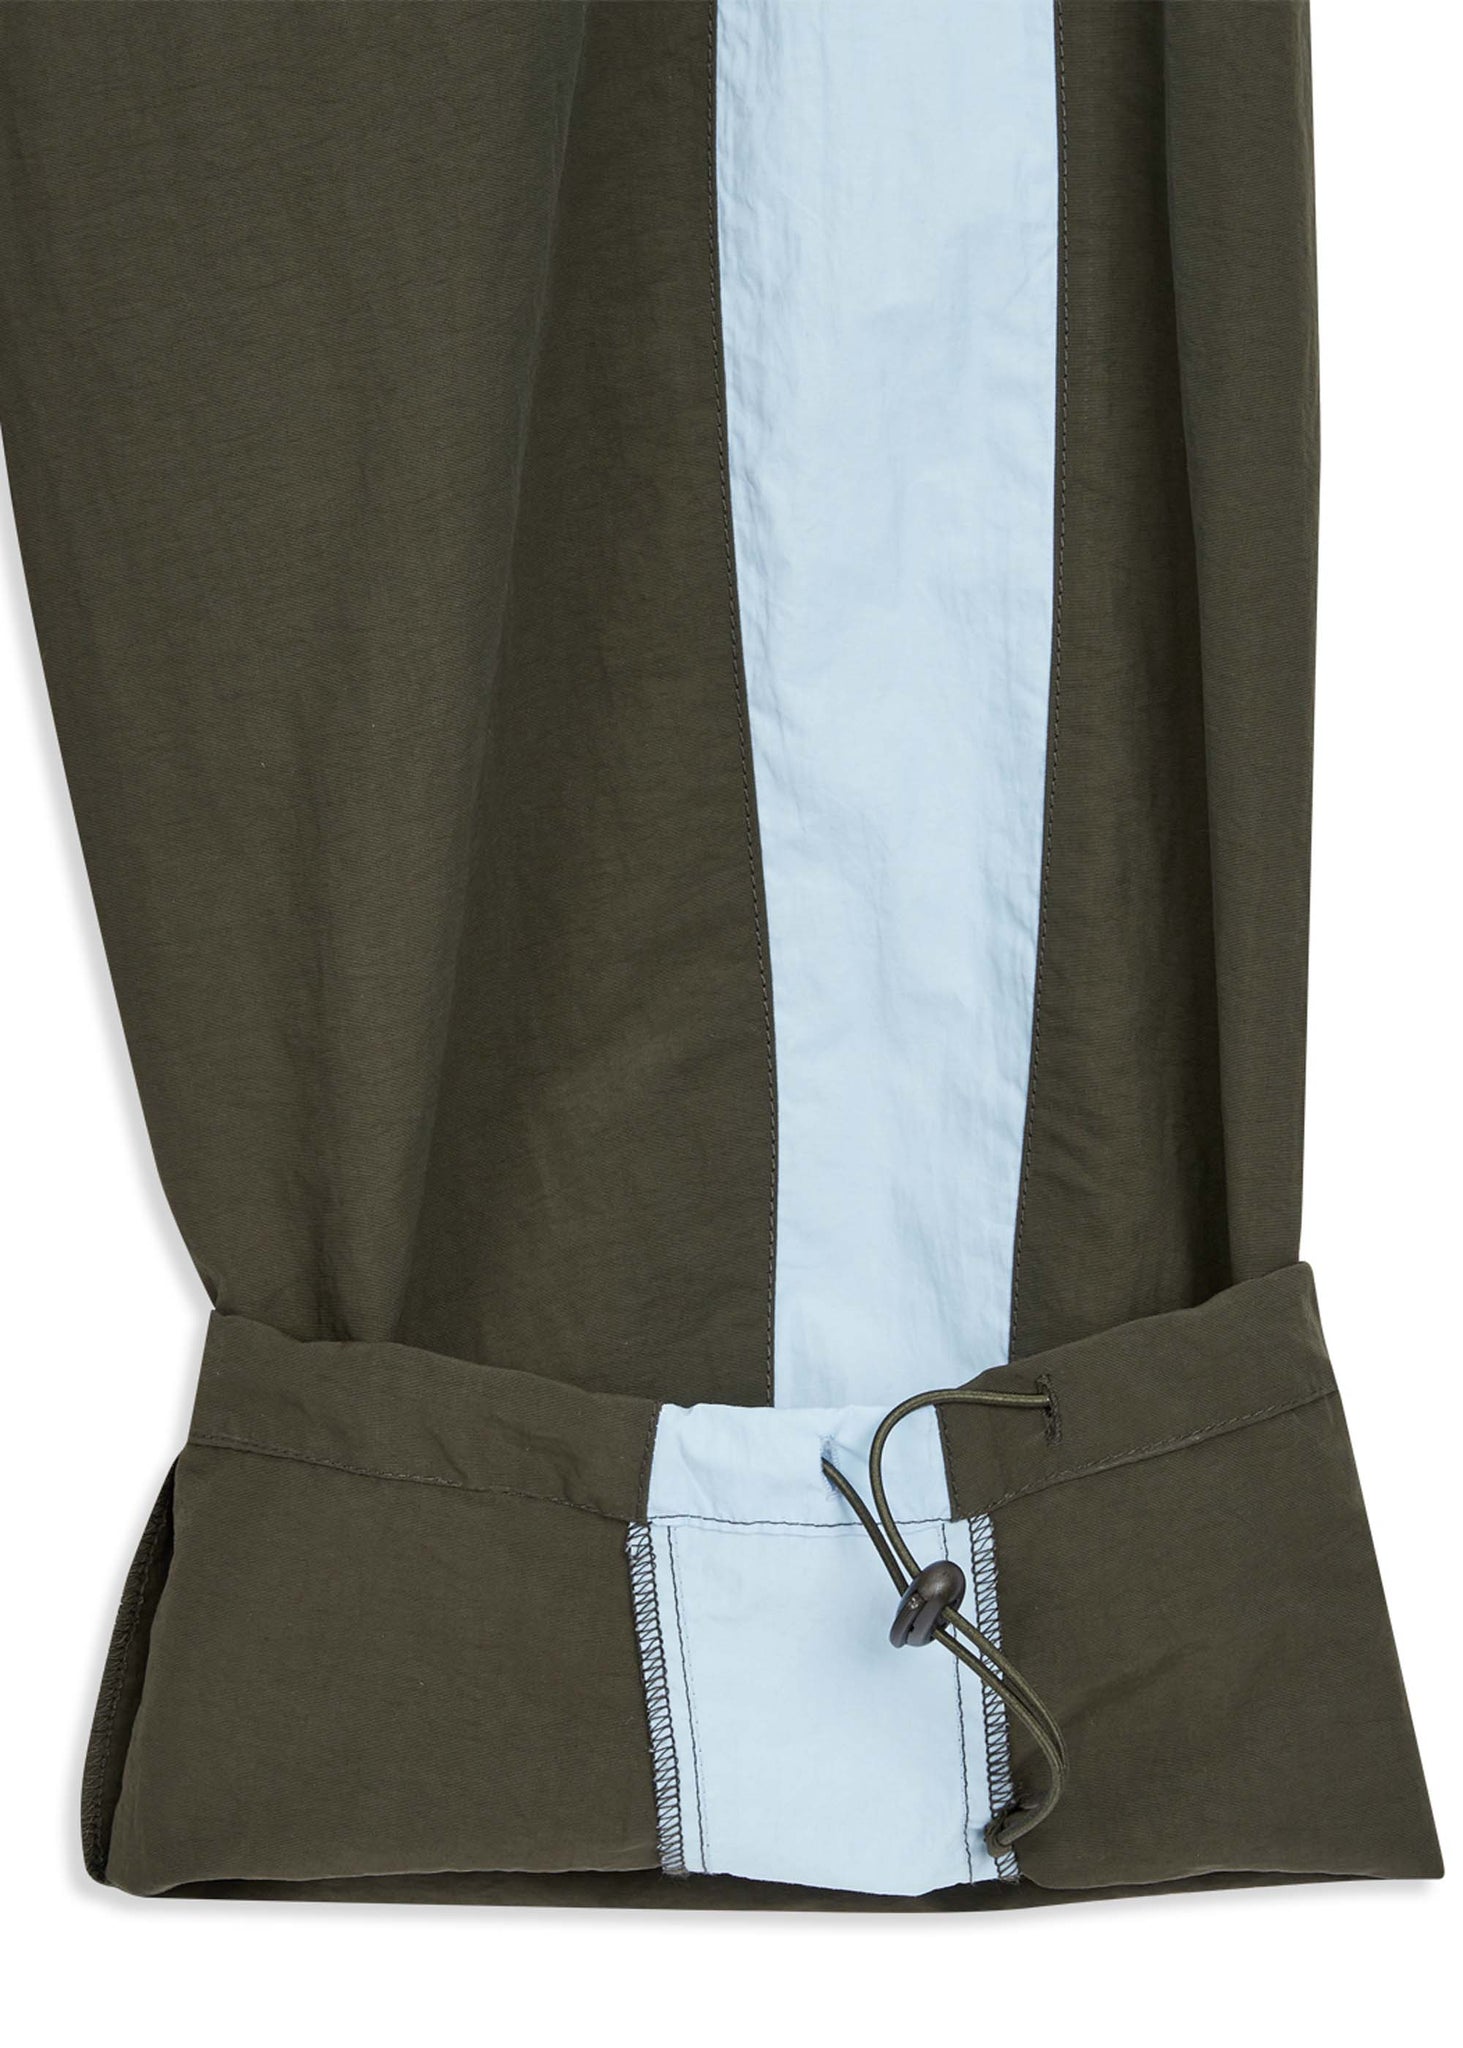 Brown and Light Blue Loungepant